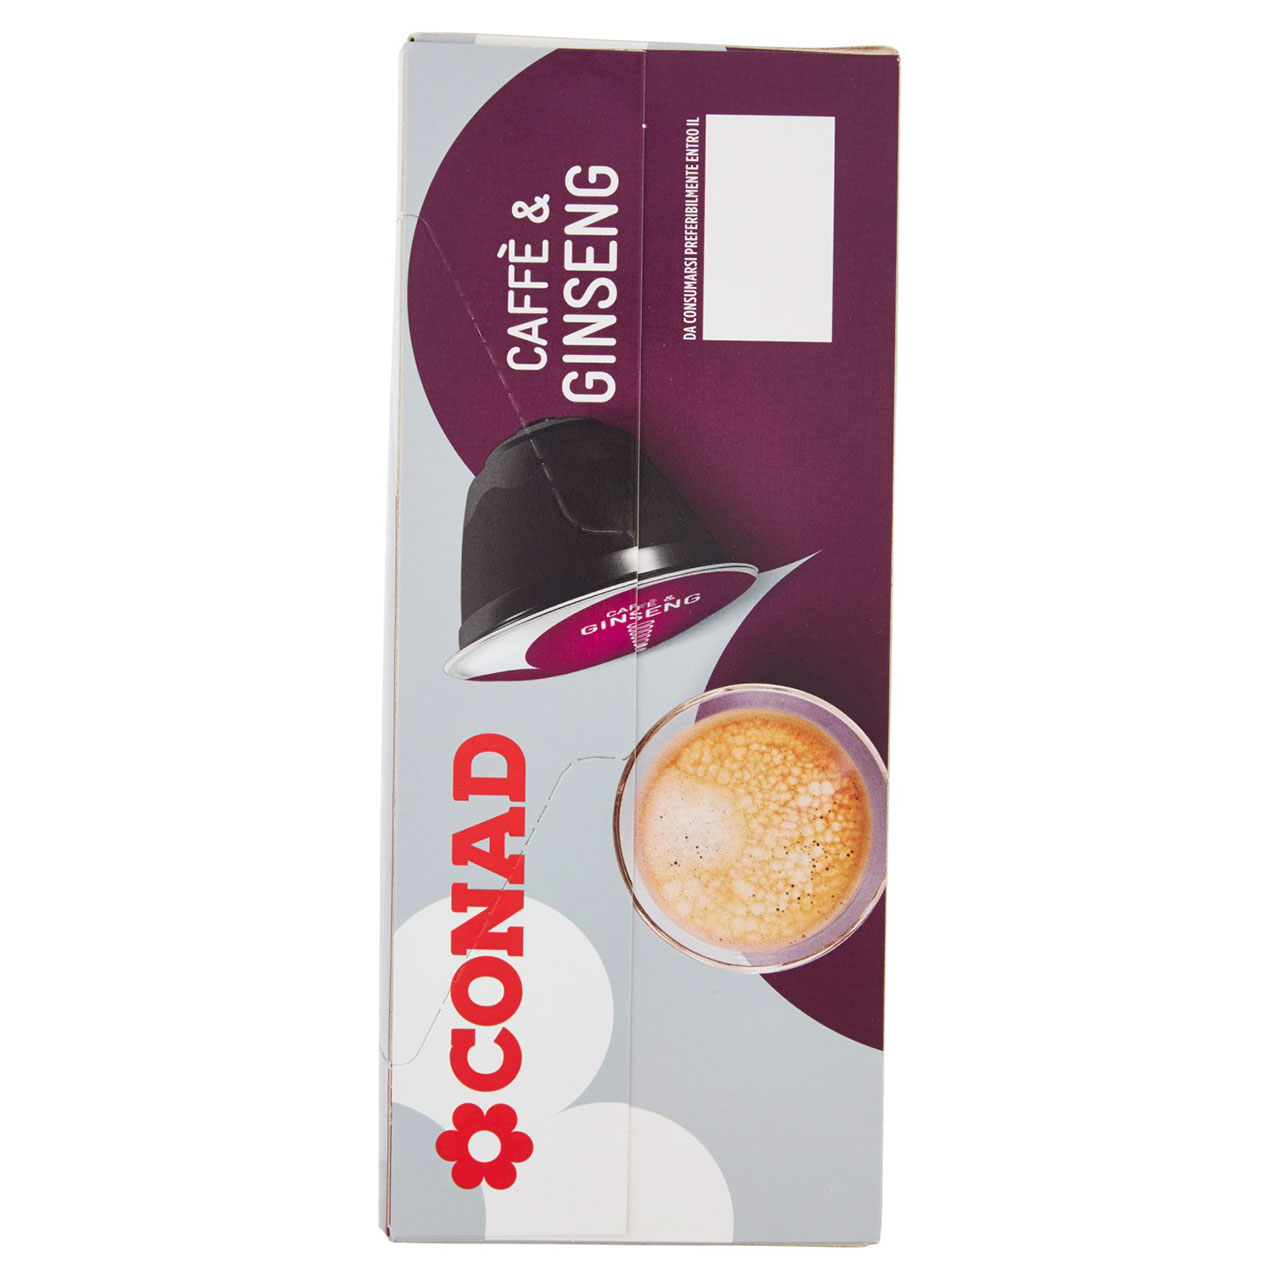 Caffè & Ginseng 16 Capsule Dolce Gusto Conad